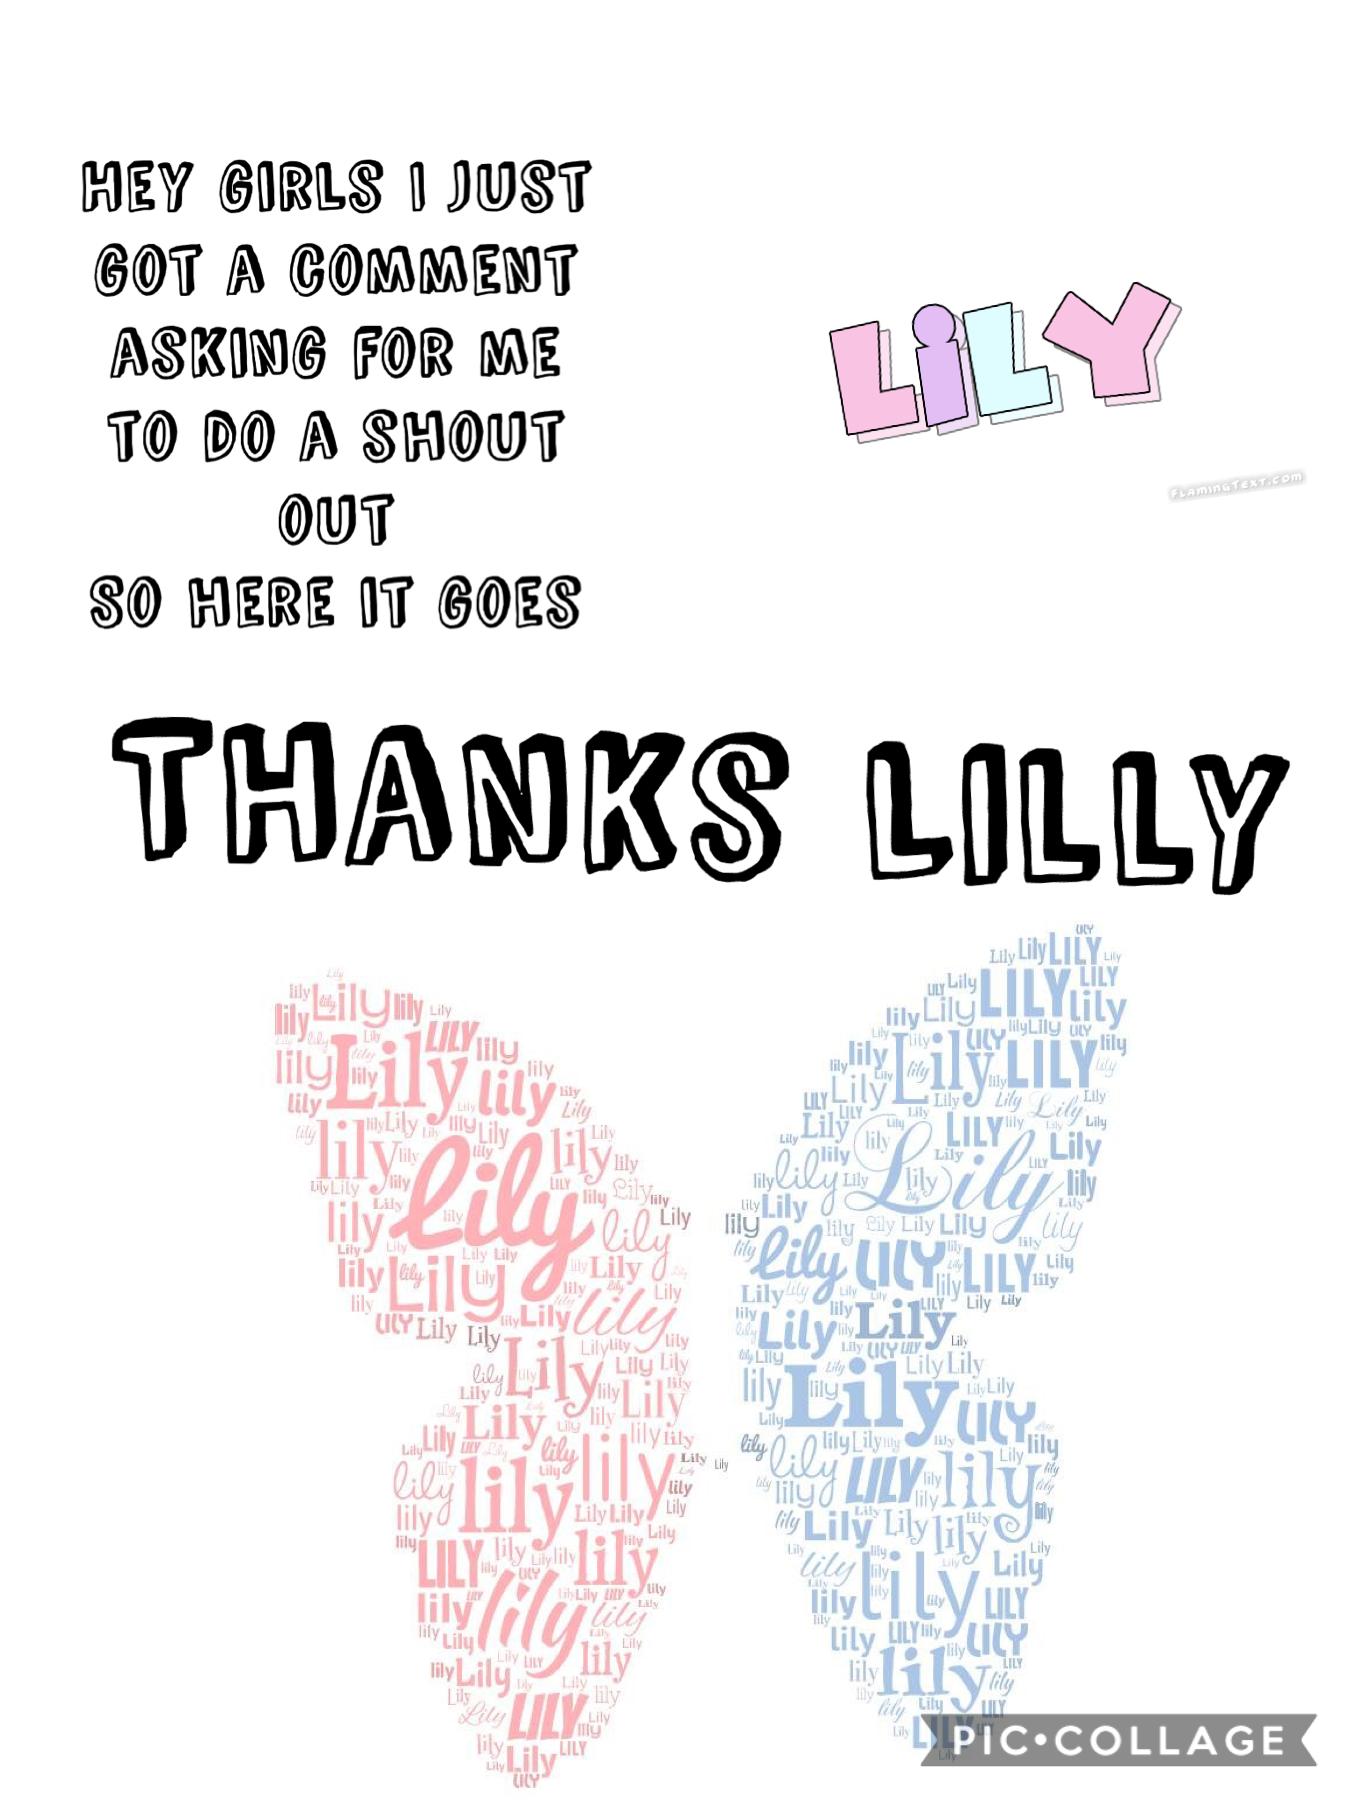 Thanks lilly